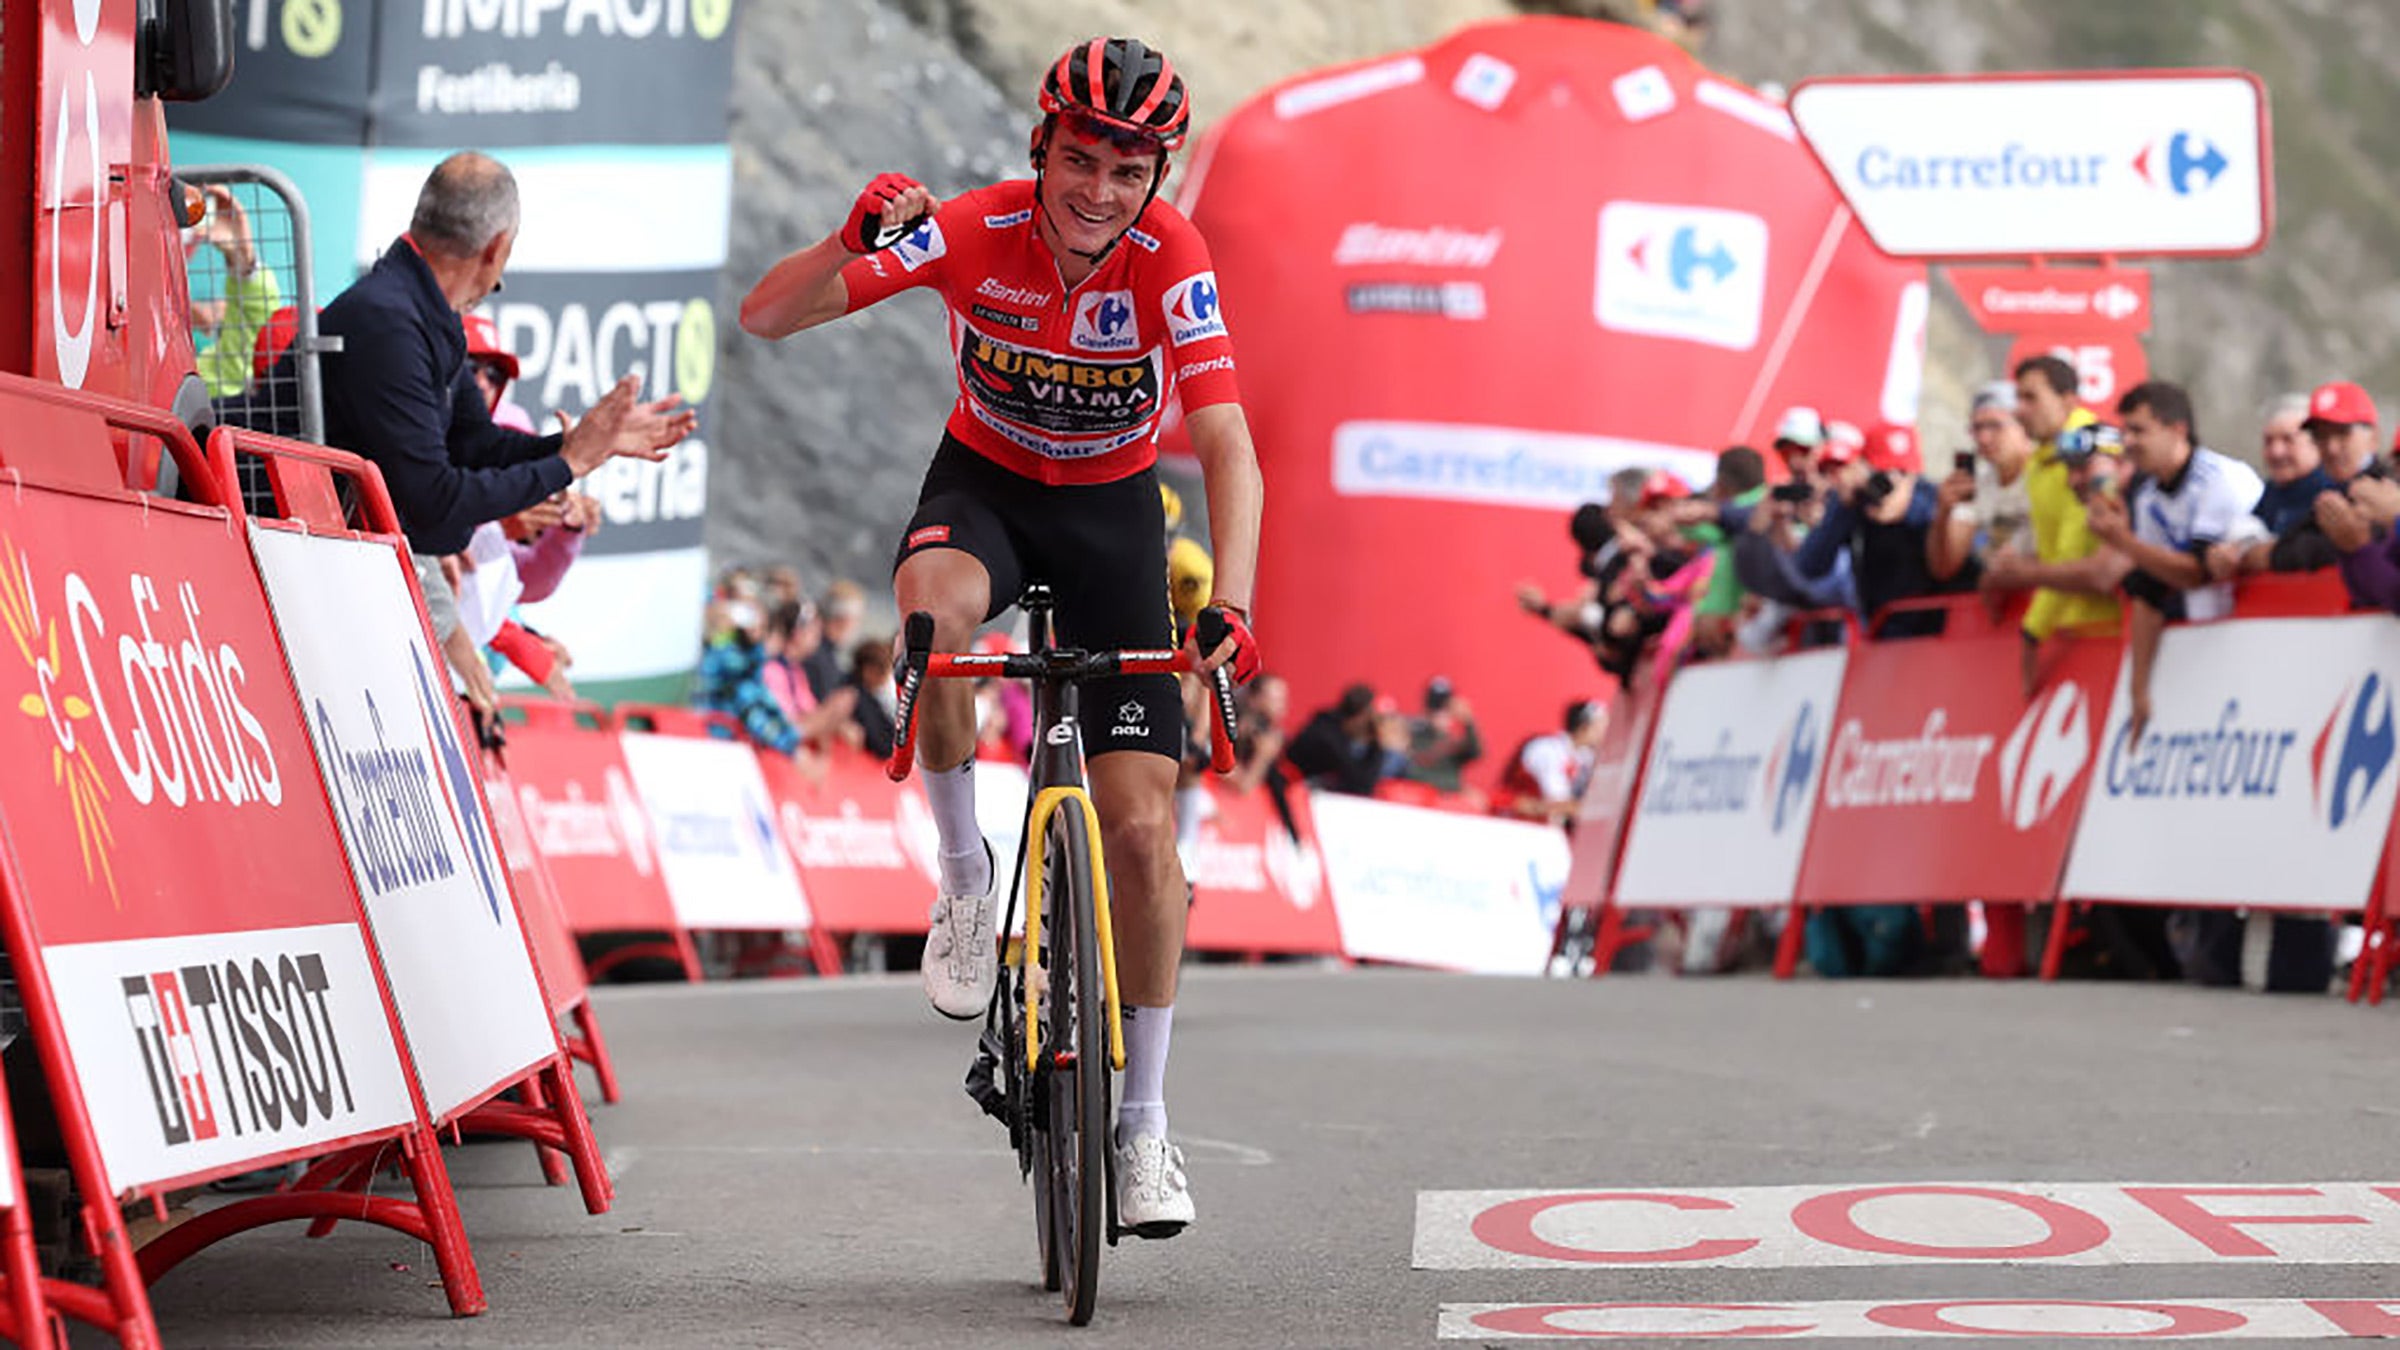 American Sepp Kuss wins a stage of the Vuelta a Espana